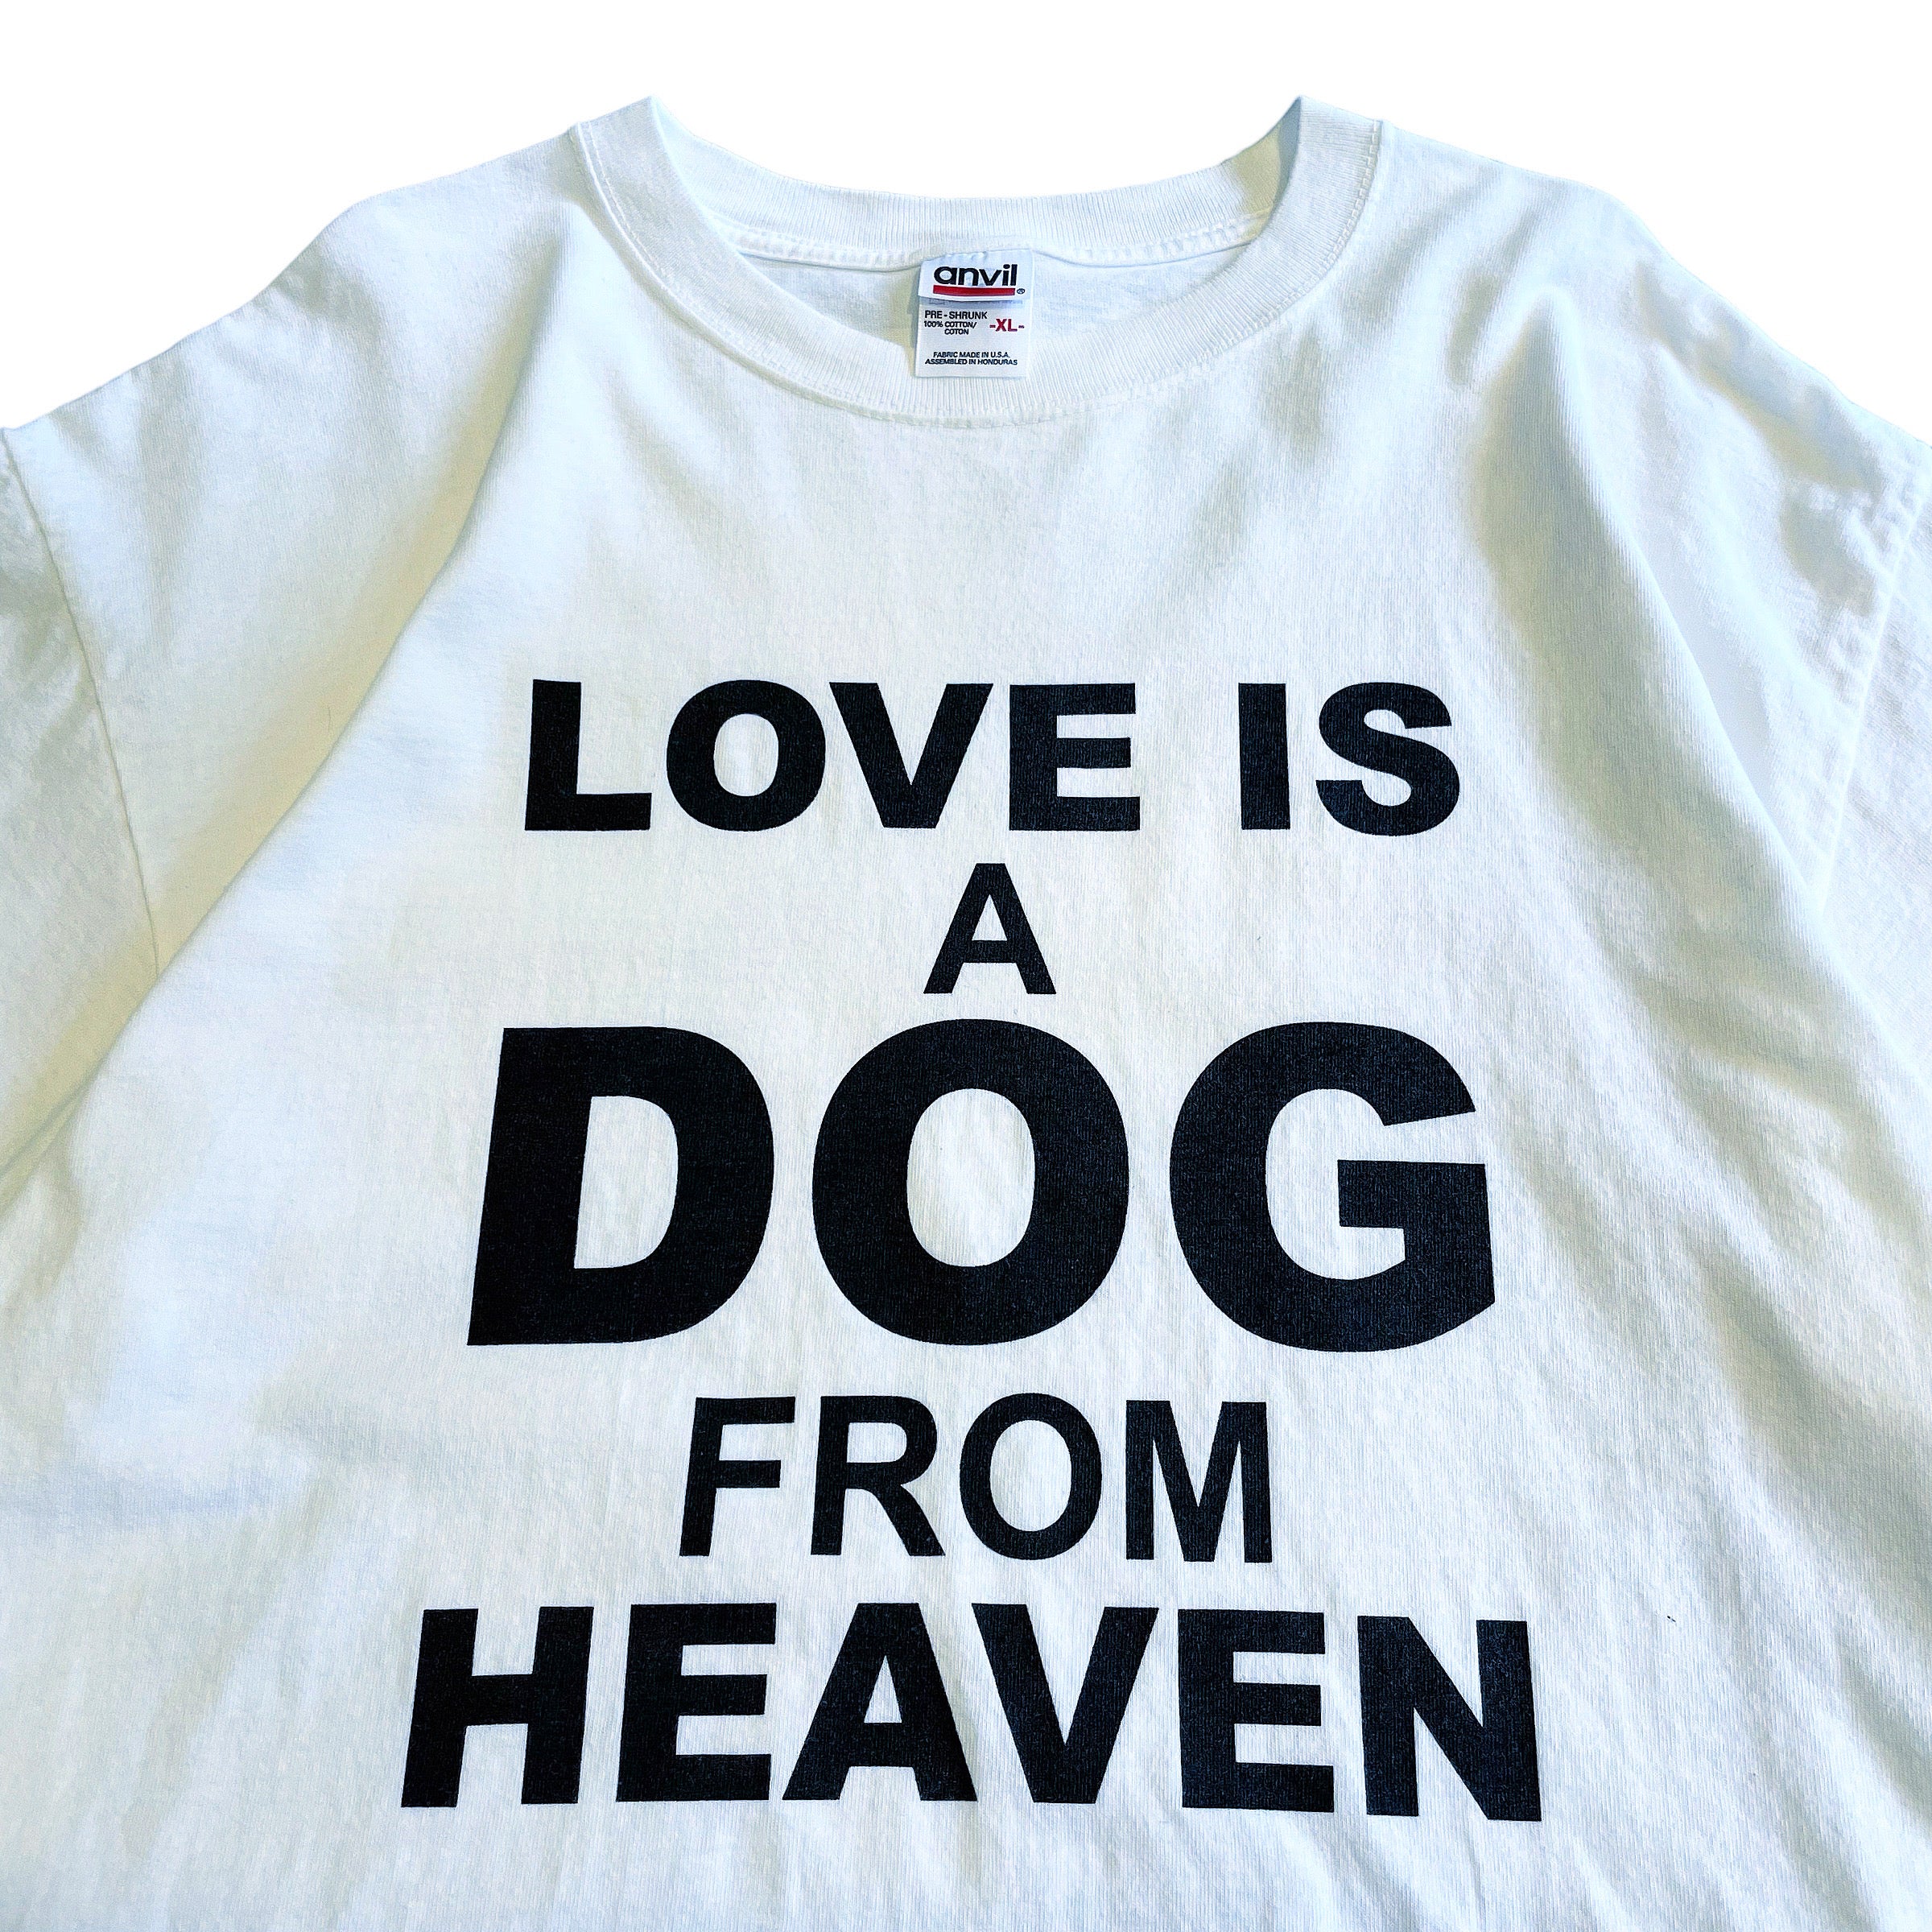 90s〜00s〜 anvil T-shirt LOVE A DOG FROM HEVEN XL アンビル tシャツ 